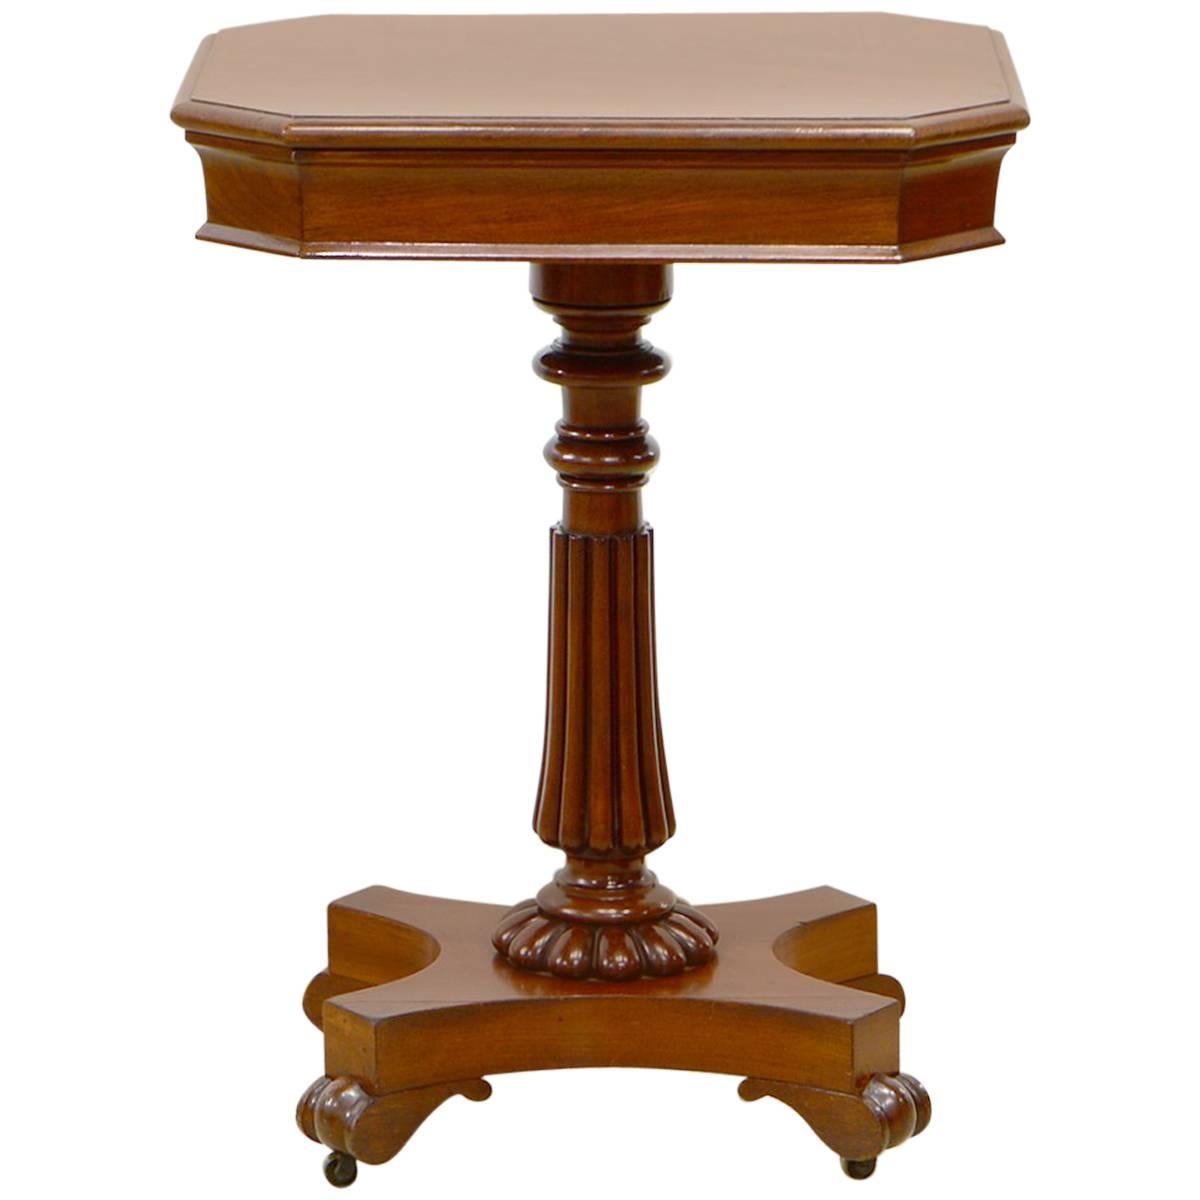 English Mid-19th Century William IV Mahogany Pedestal Table with Frieze Drawer